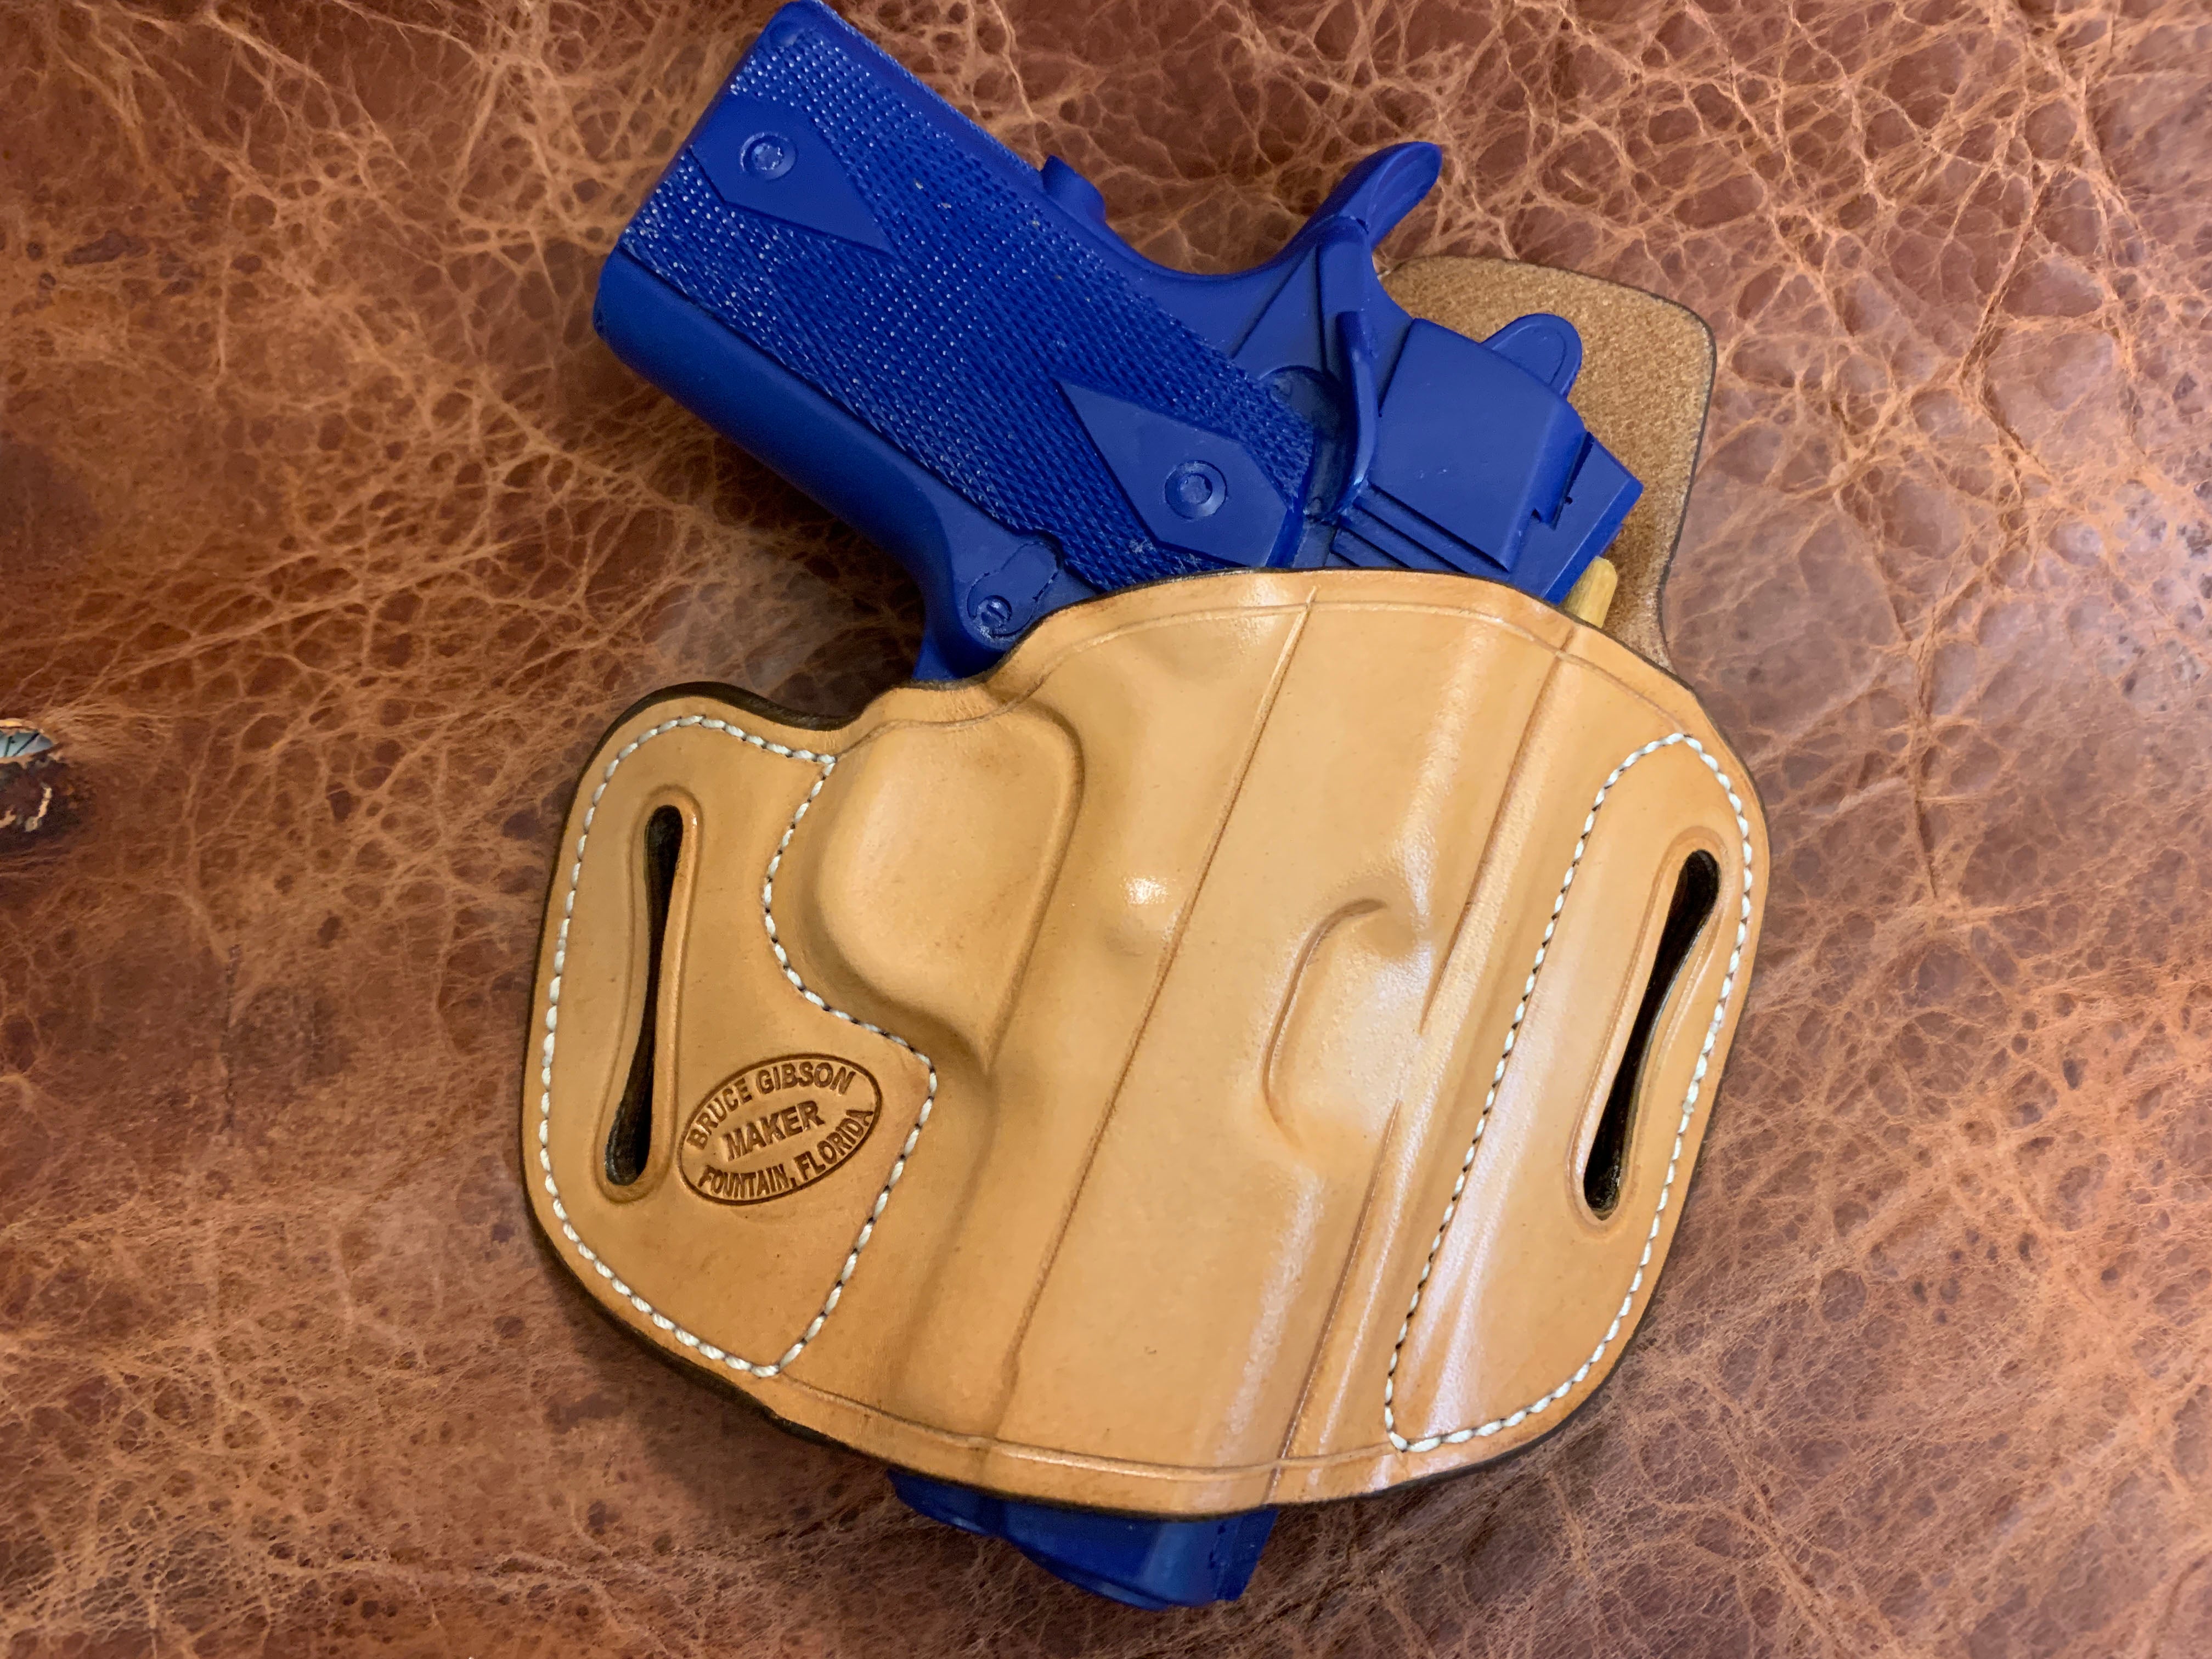 IN-STOCK GIBSON 1911 3" OWB LEATHER PANCAKE HOLSTER NATURAL WITH SWEAT SHIELD 20-DEGREE RAKE